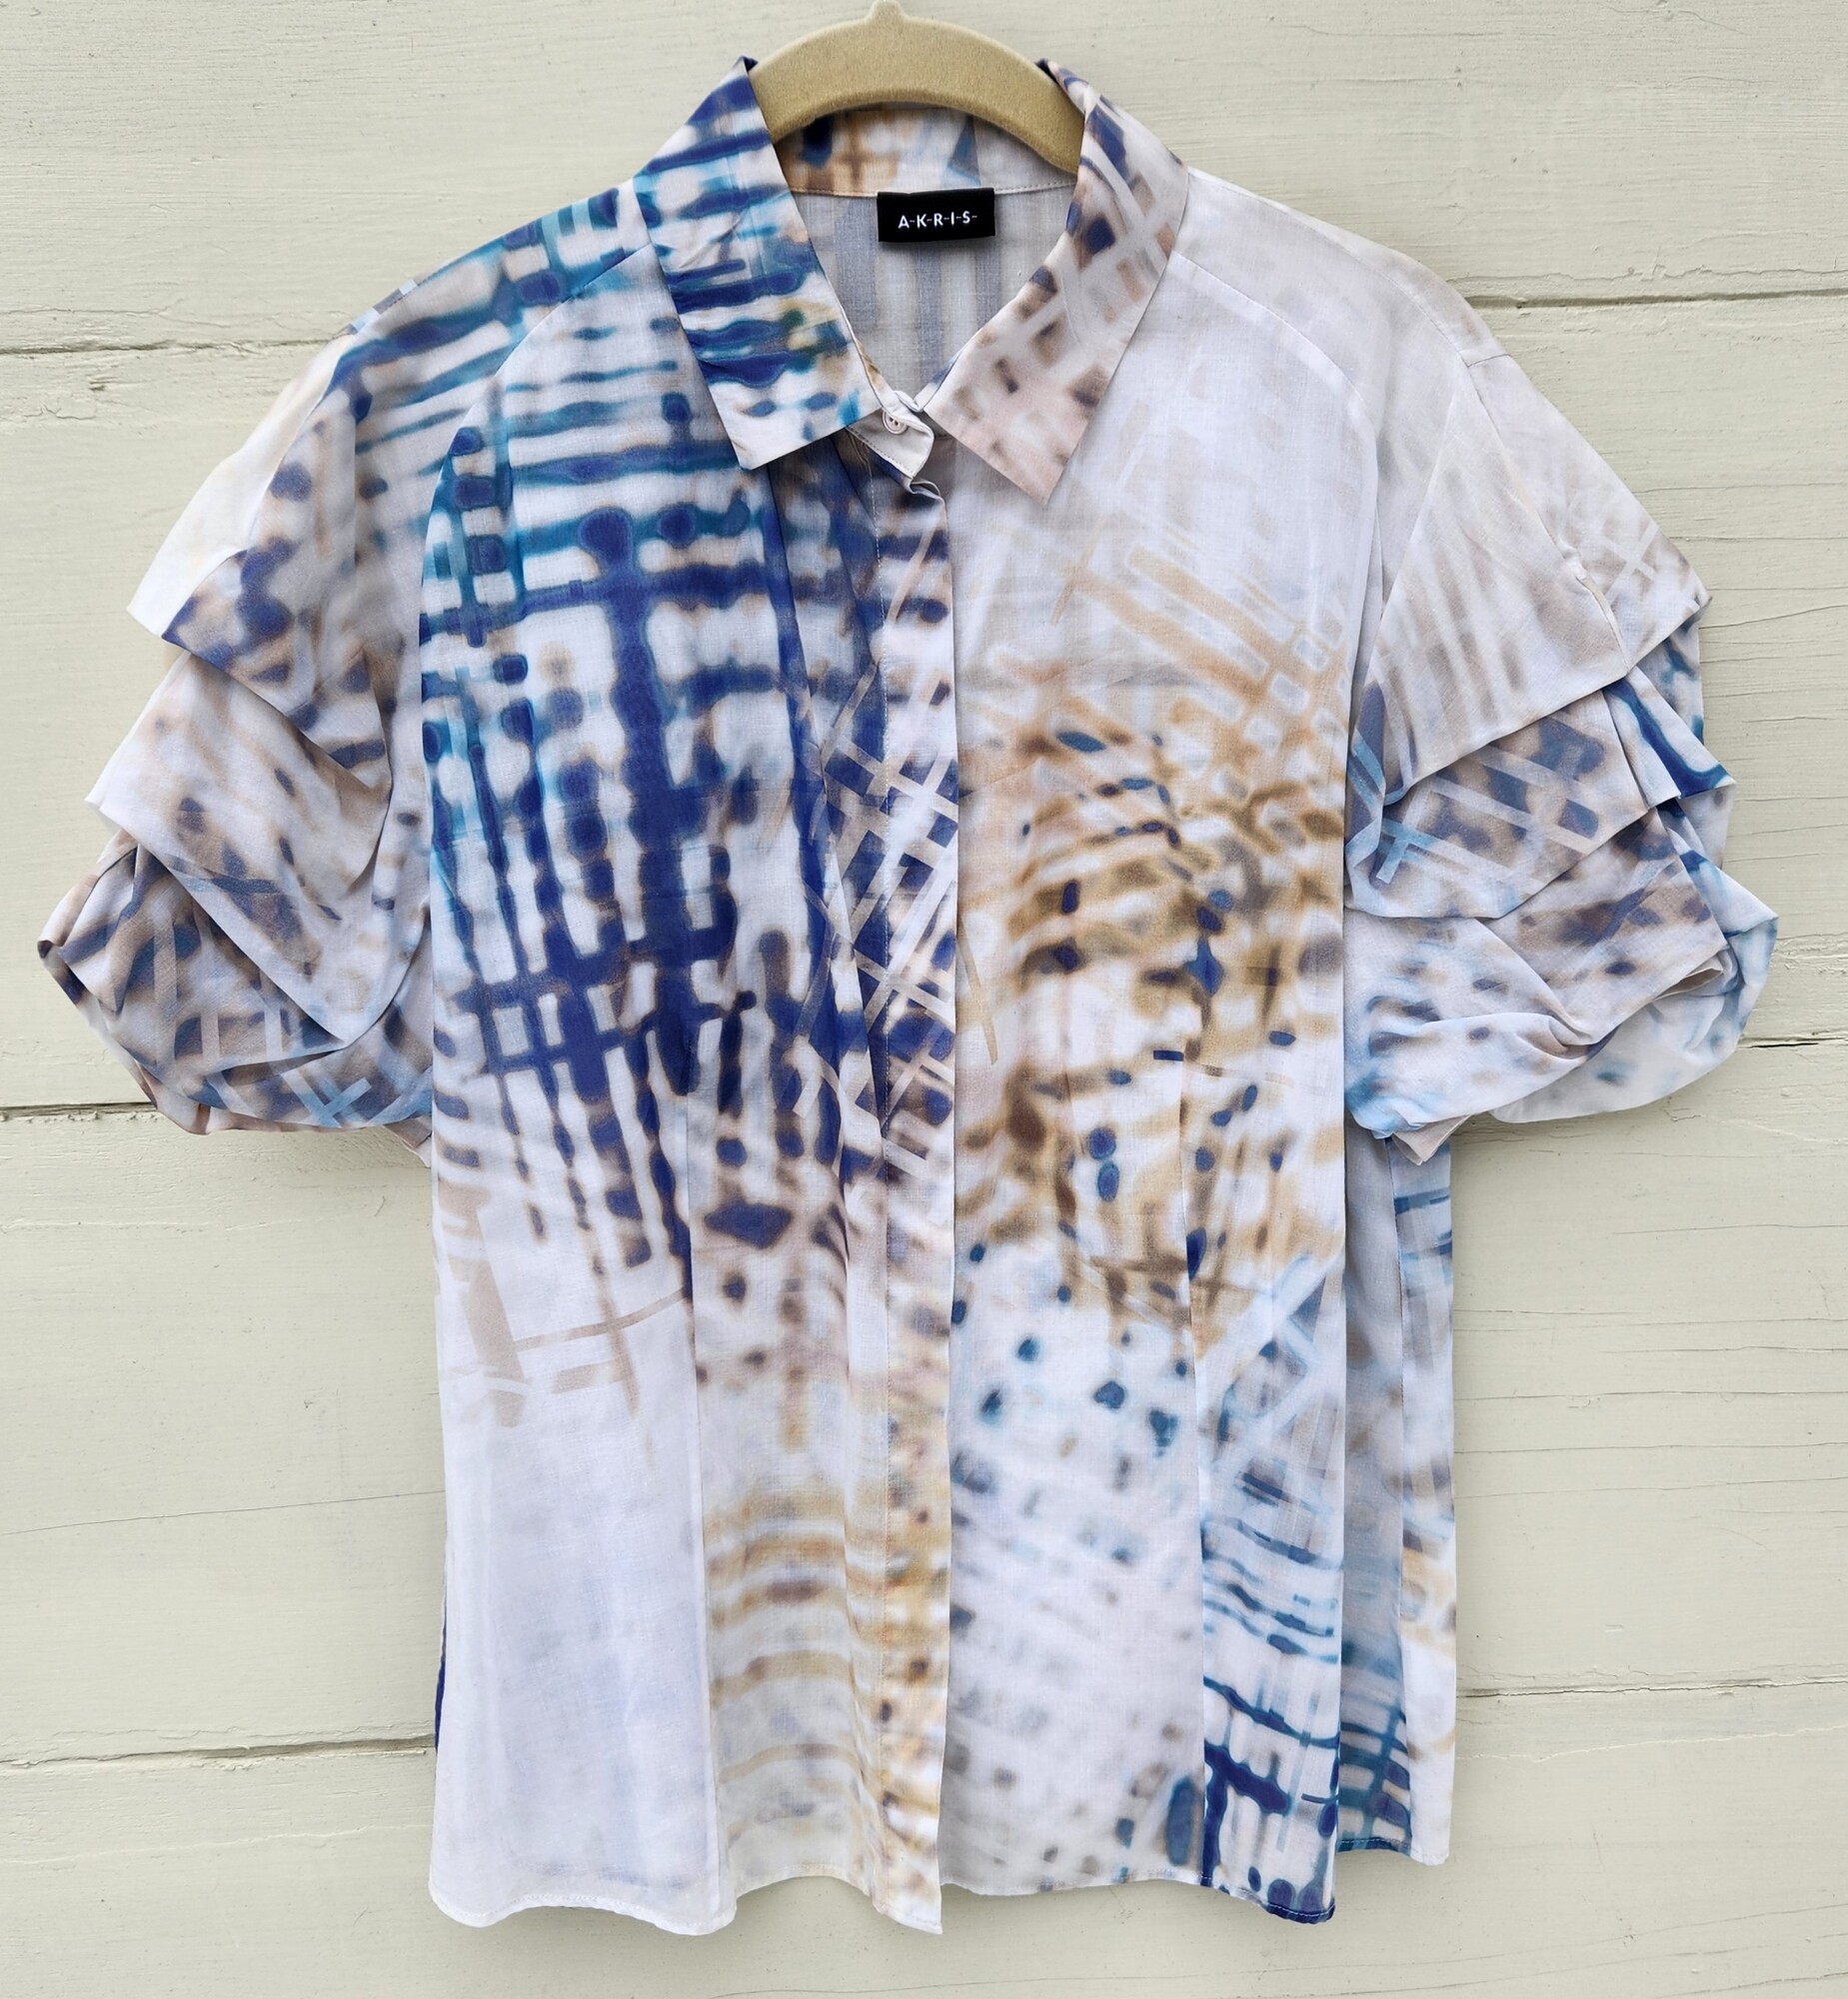 Akris Sheer Blouse Layered Short Sleeves Blouse Size 10 US
Off white cotton Blouse with Blue and Tan abstract design
Hidden front button down
Pit to Pit 20 inches
Pit down sleeve 4 inches
Waist 19.5 inches across
Down the back 25 inches
EUC
Retail $1200